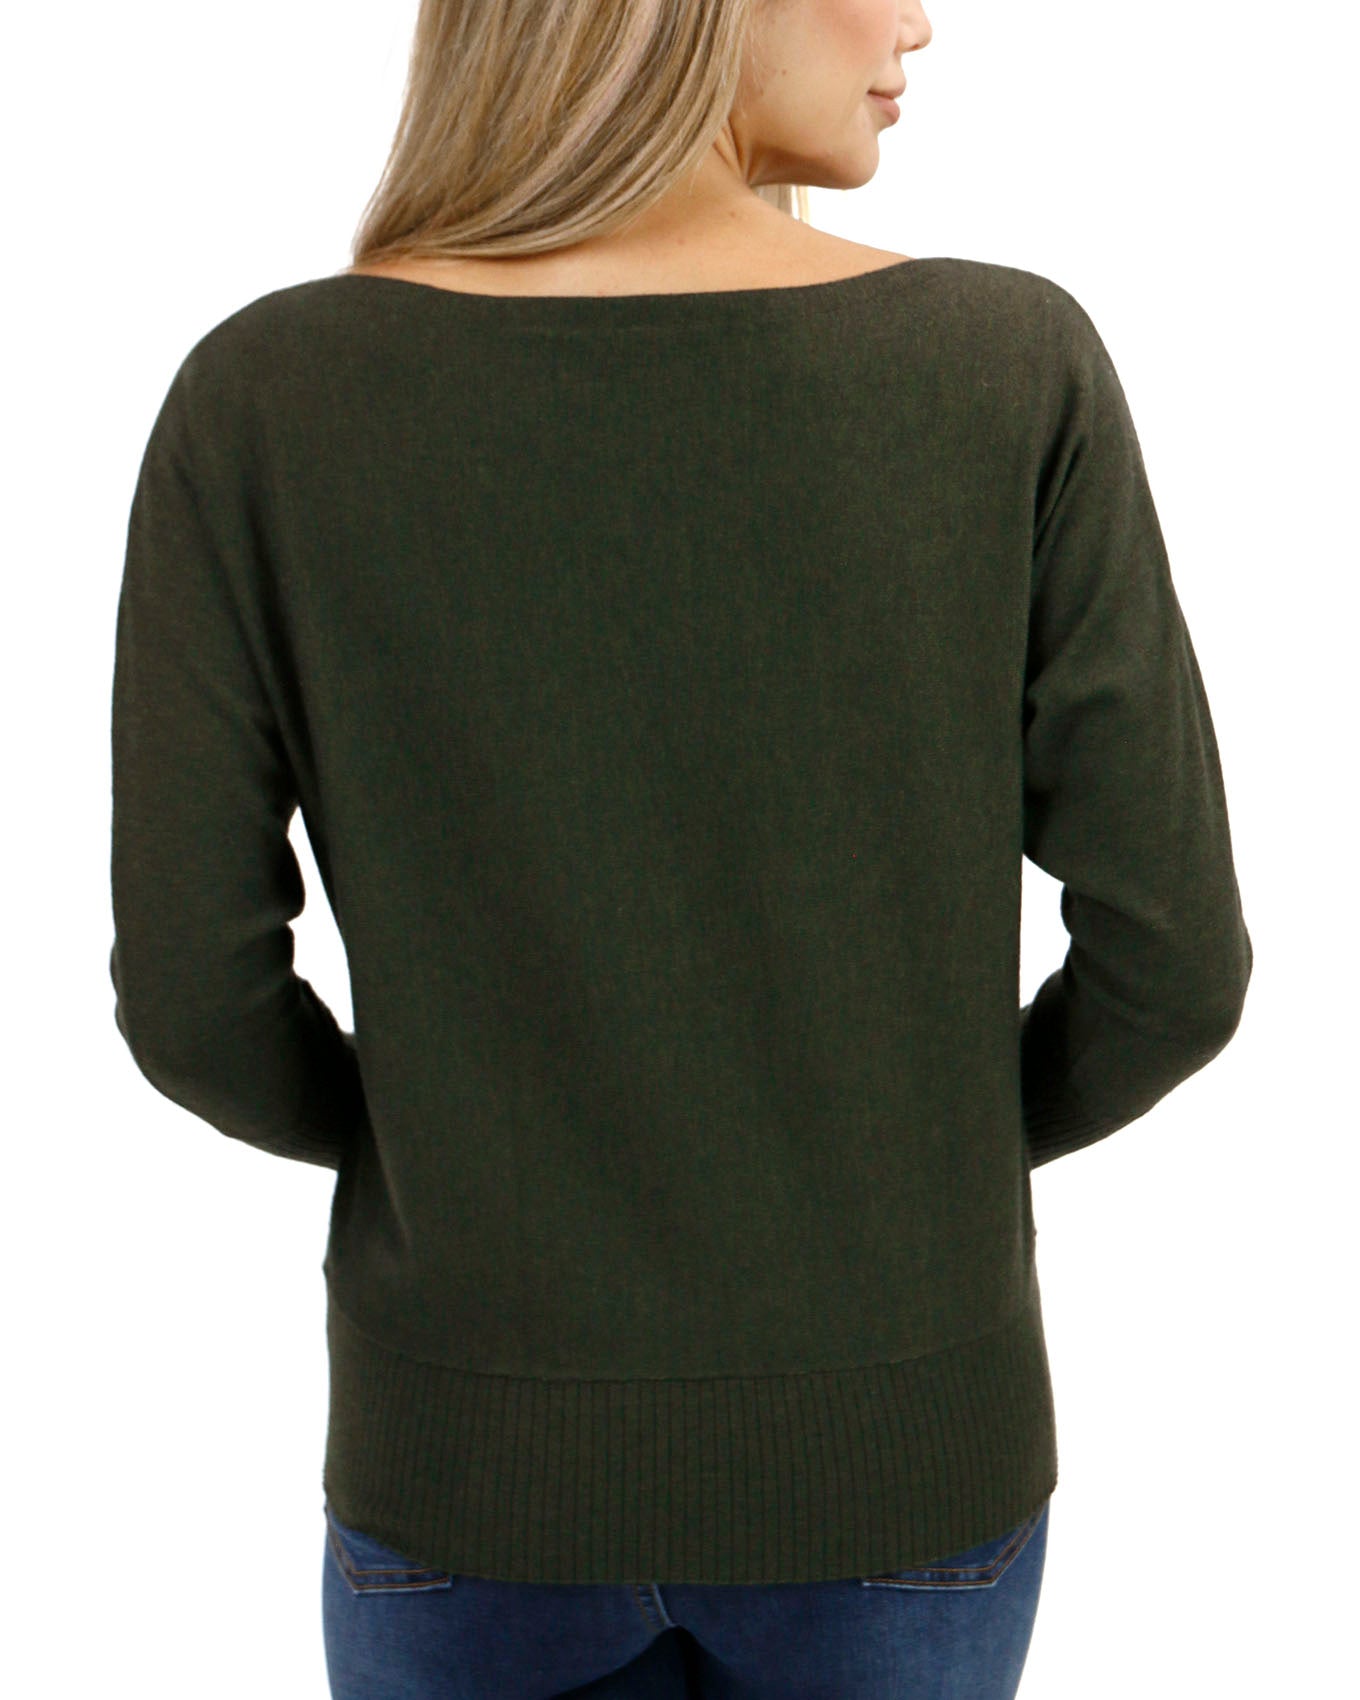 Classic & Cozy Winter Moss Sweater Top - Grace and Lace